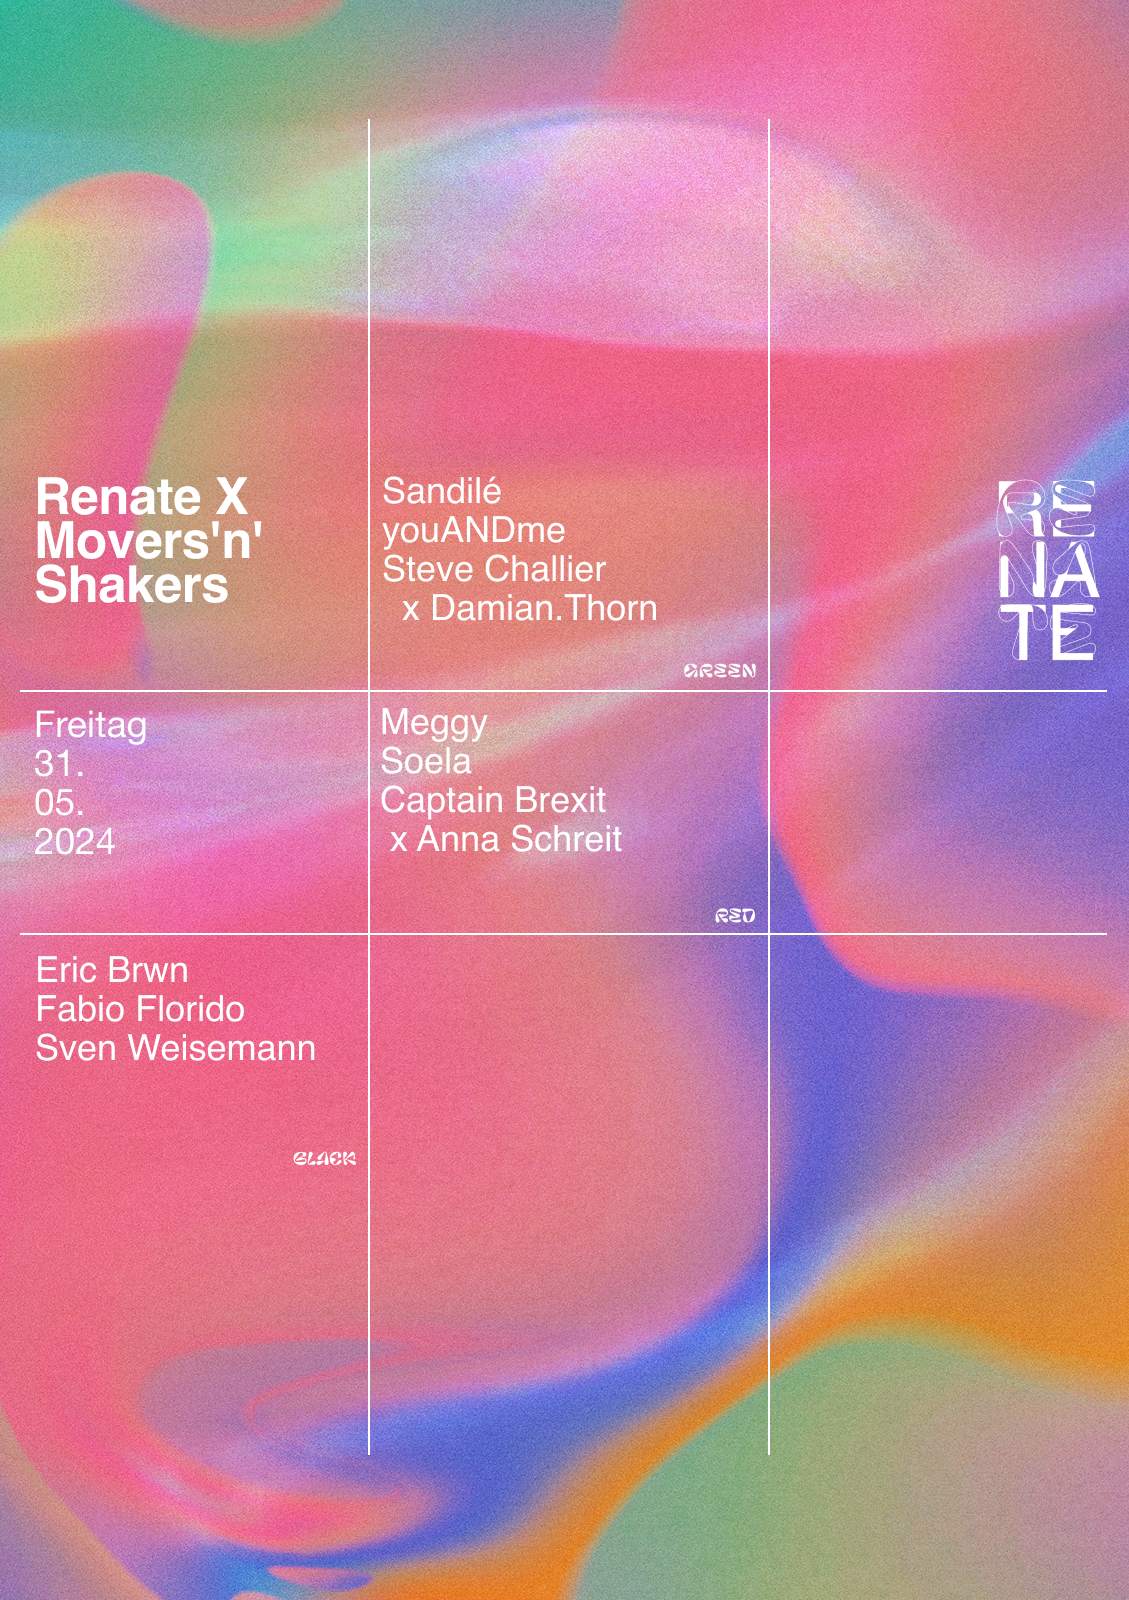  Renate X Movers'n'Shakers - フライヤー表